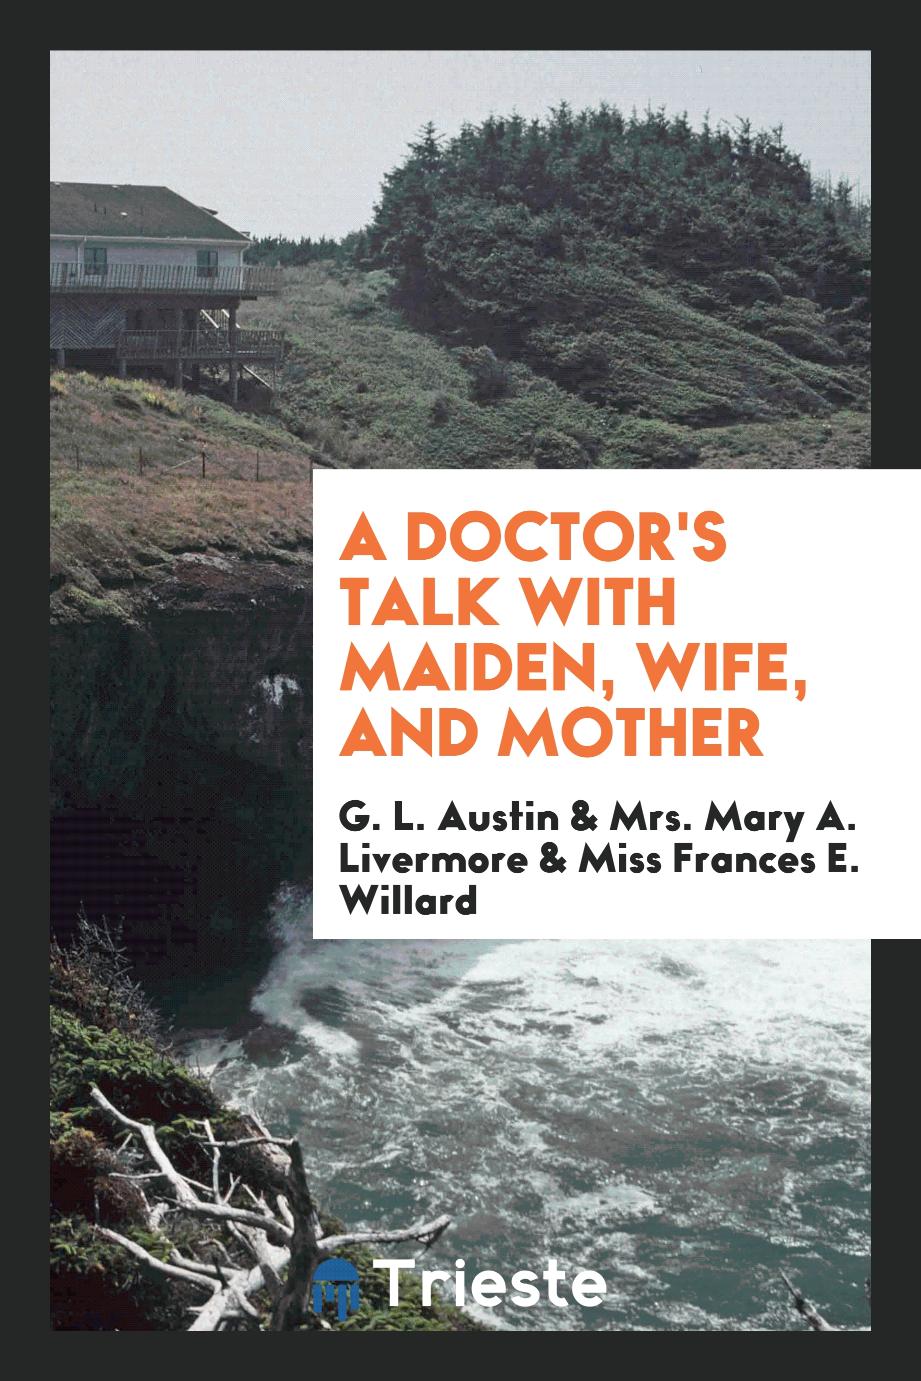 A Doctor's Talk with Maiden, Wife, and Mother